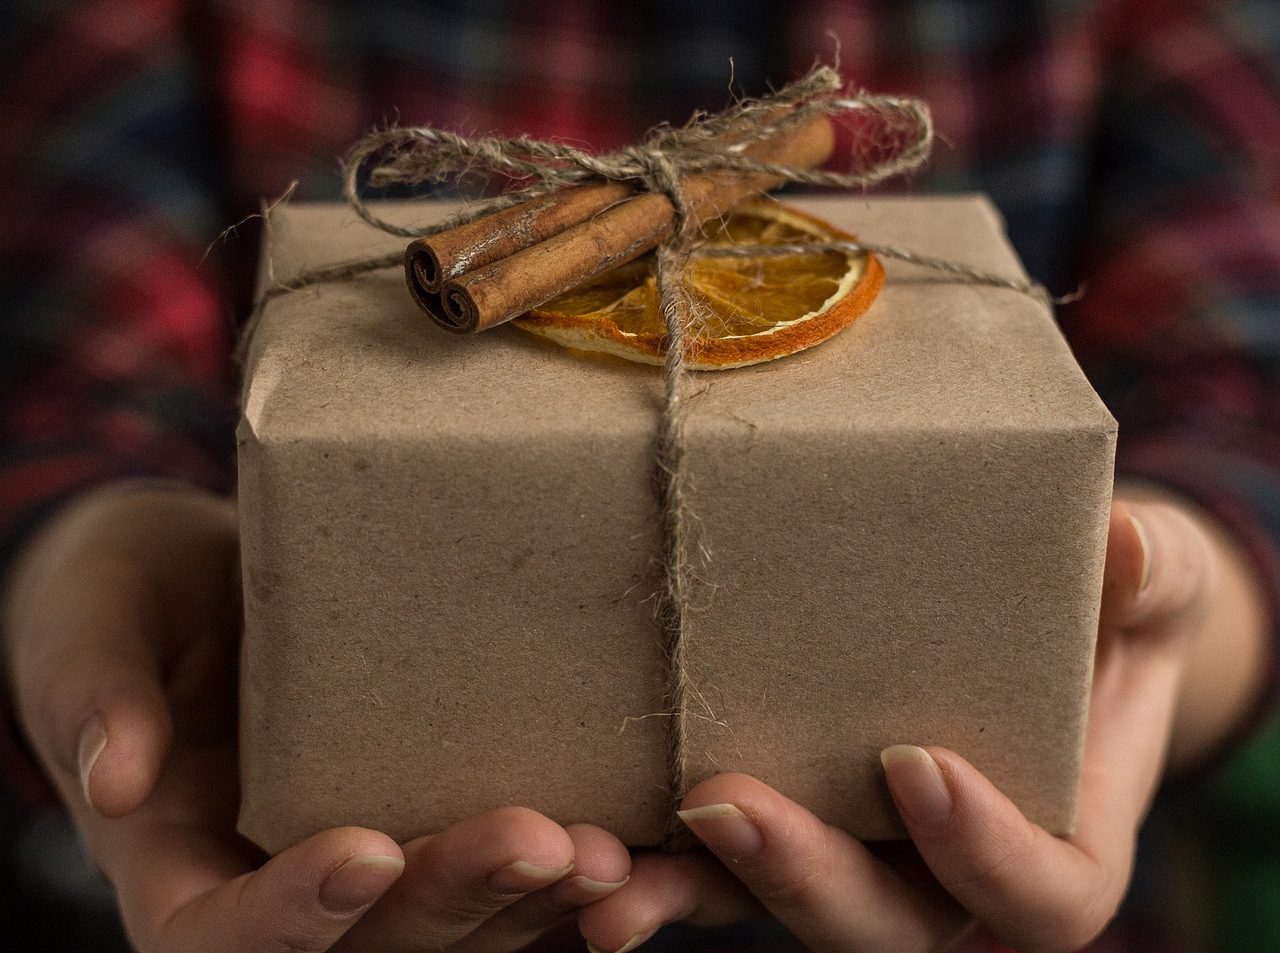 White hands holding a wrapped box, adorned with dried orange and a cinnamon stick